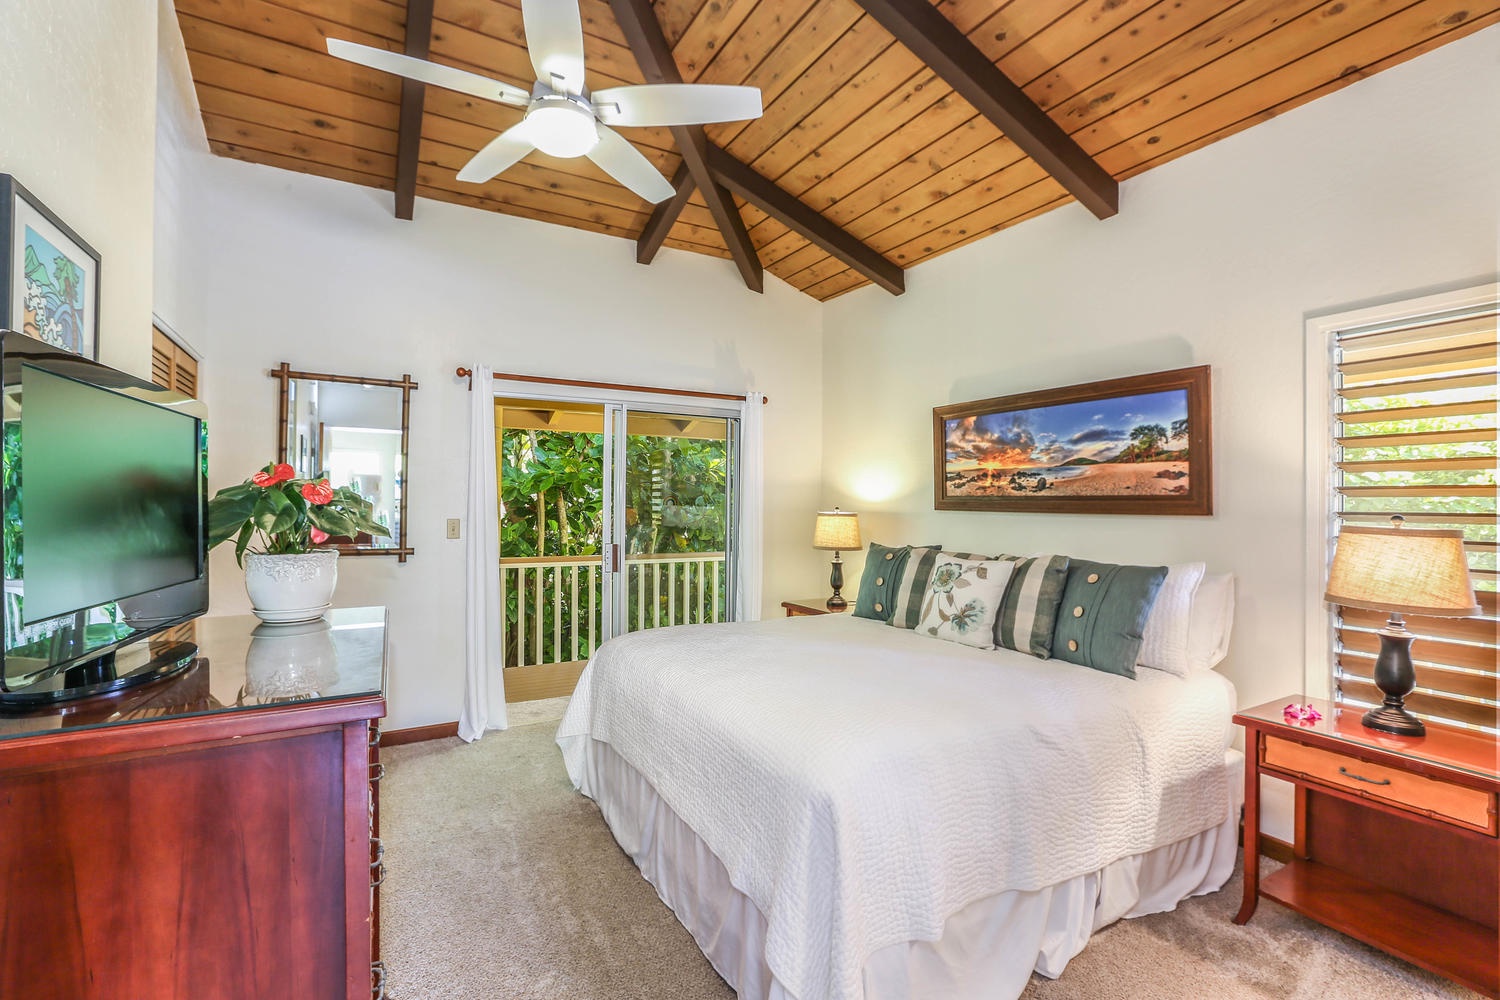 Hanalei Vacation Rentals, Hallor House TVNC #5147 - Primary bedroom with king bed